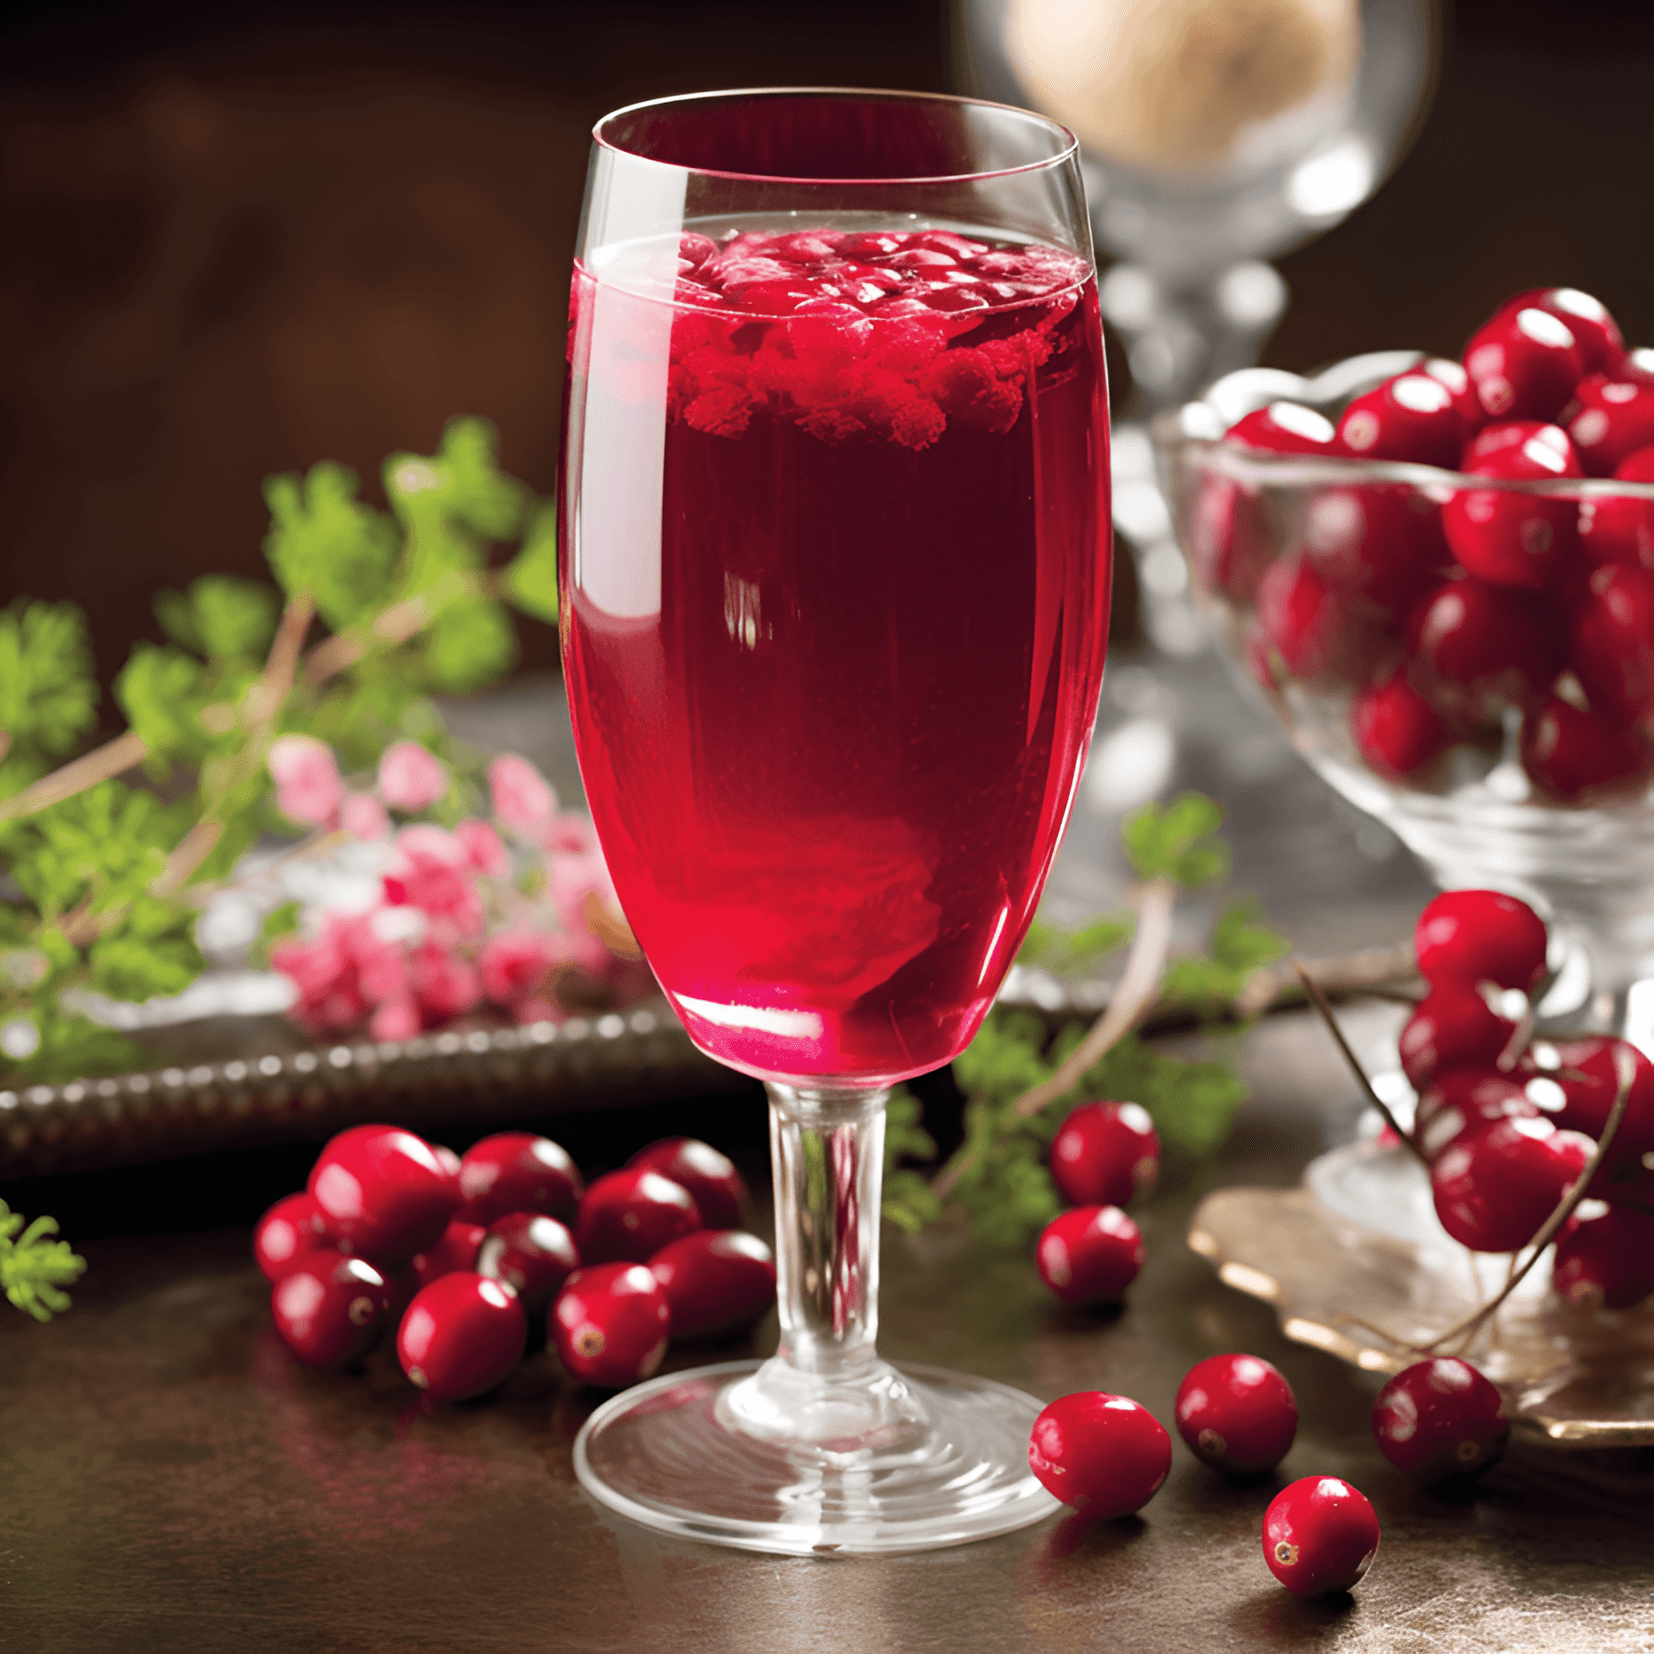 The Poinsettia cocktail has a light, refreshing, and slightly sweet taste. The combination of cranberry juice, orange liqueur, and champagne creates a delightful balance of fruity and bubbly flavors, with a hint of tartness from the cranberry juice.